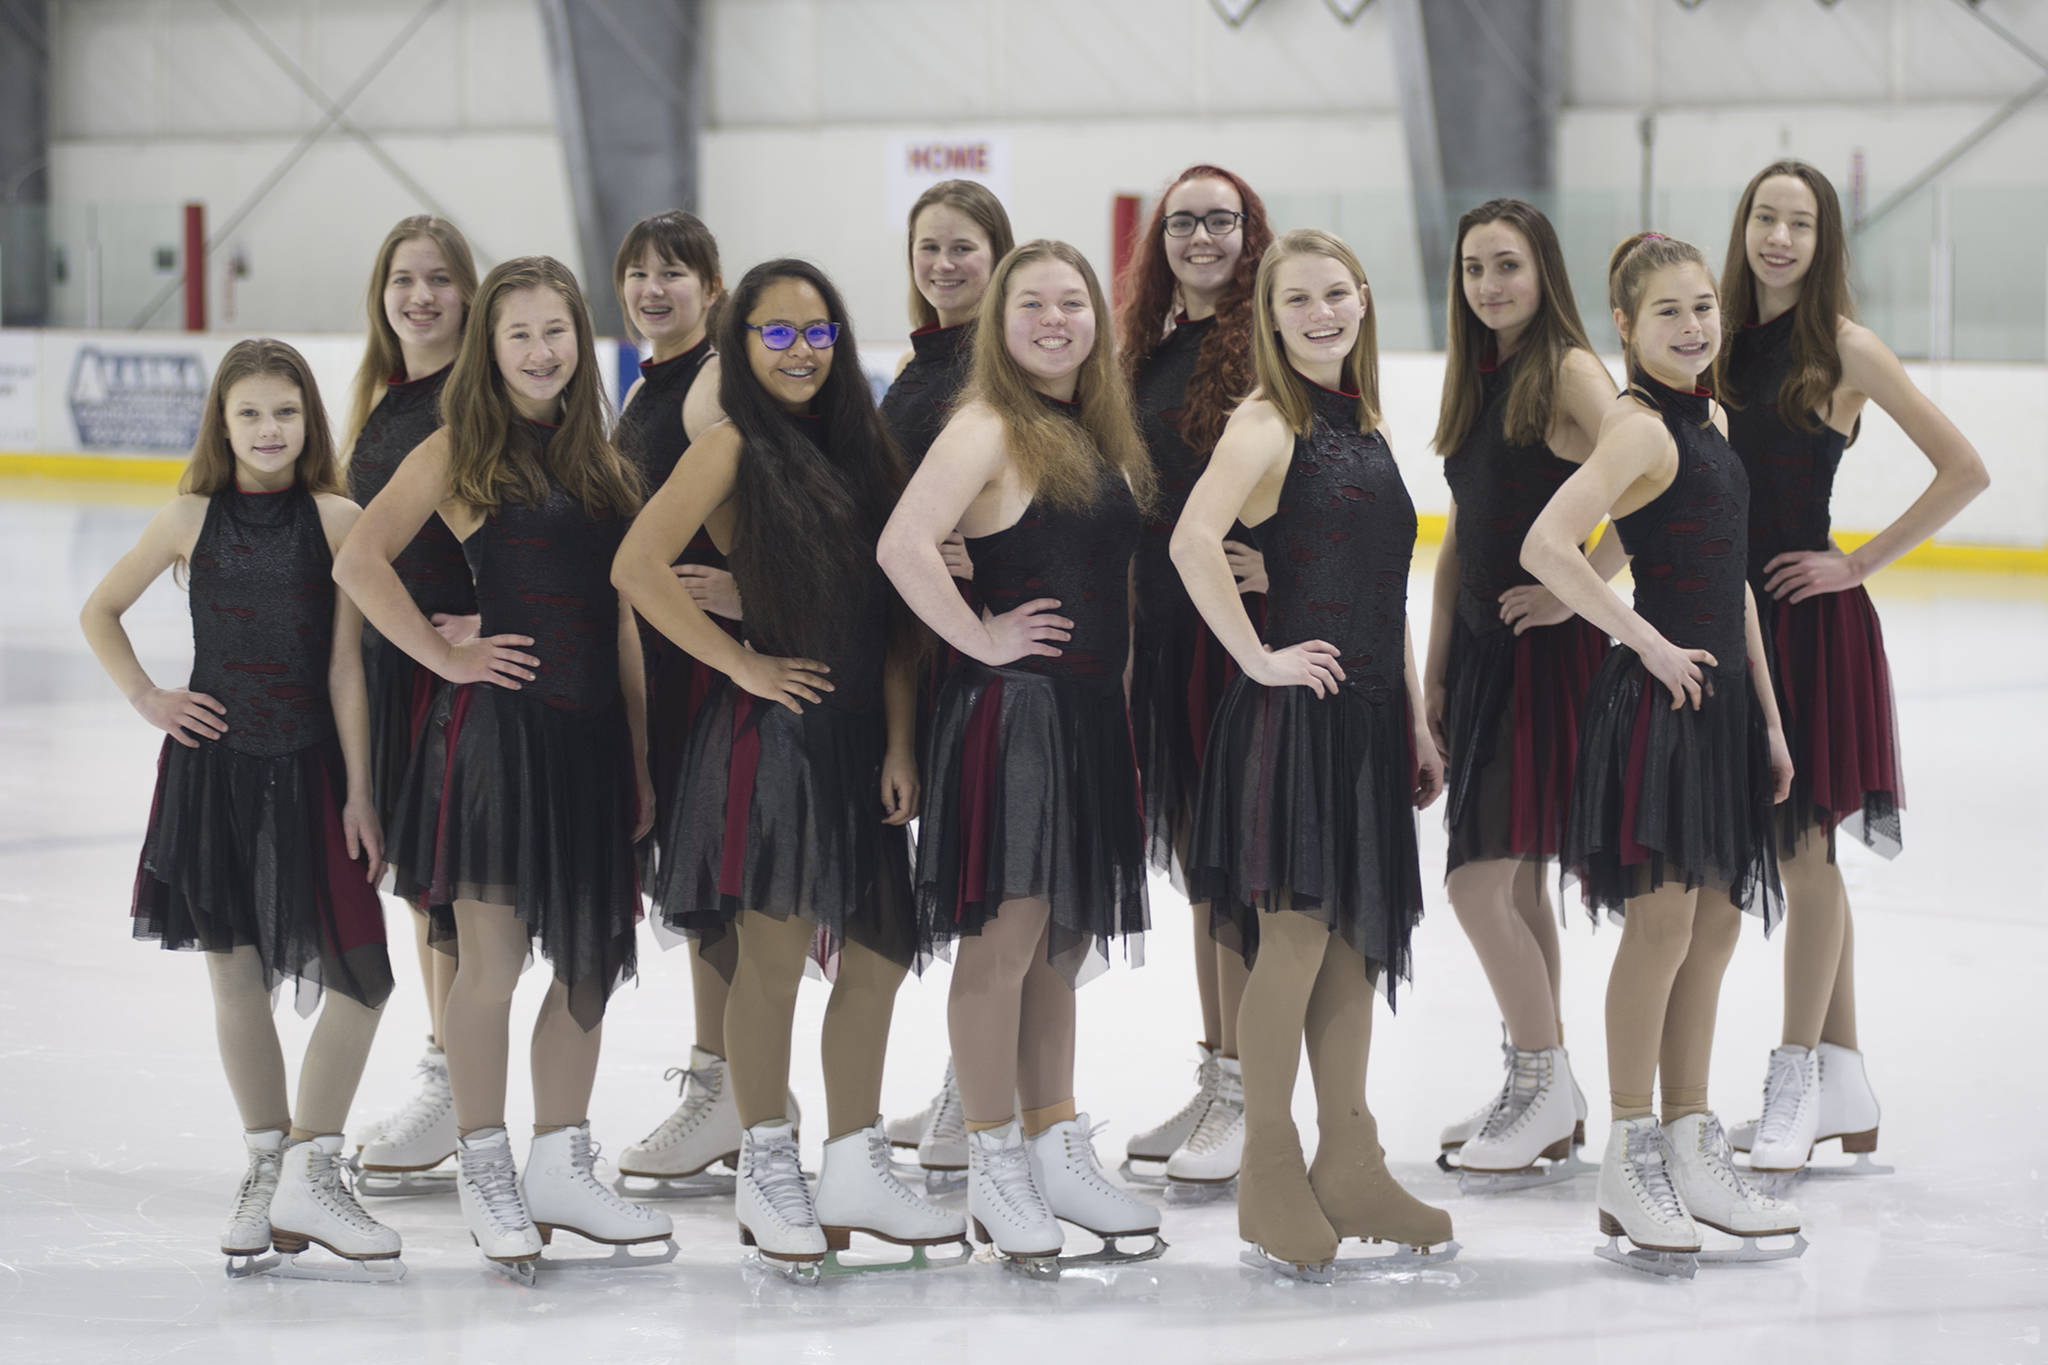 Team Forget-Me-Not pictured at Treadwell Arena on Saturday, Jan. 26, 2019. Back row (left to right): Katherine Fritsch, Melissa Maxwell, Allison Hoy, Emily Bowman, Haylee Hill, Kiera Liska. Front row: Rebecca Maxwell, Adelie McMillan, Dominque Morley, Meredith Fritsch, Leah Welch, Maisy Morley. (Nolin Ainsworth | Juneau Empire)